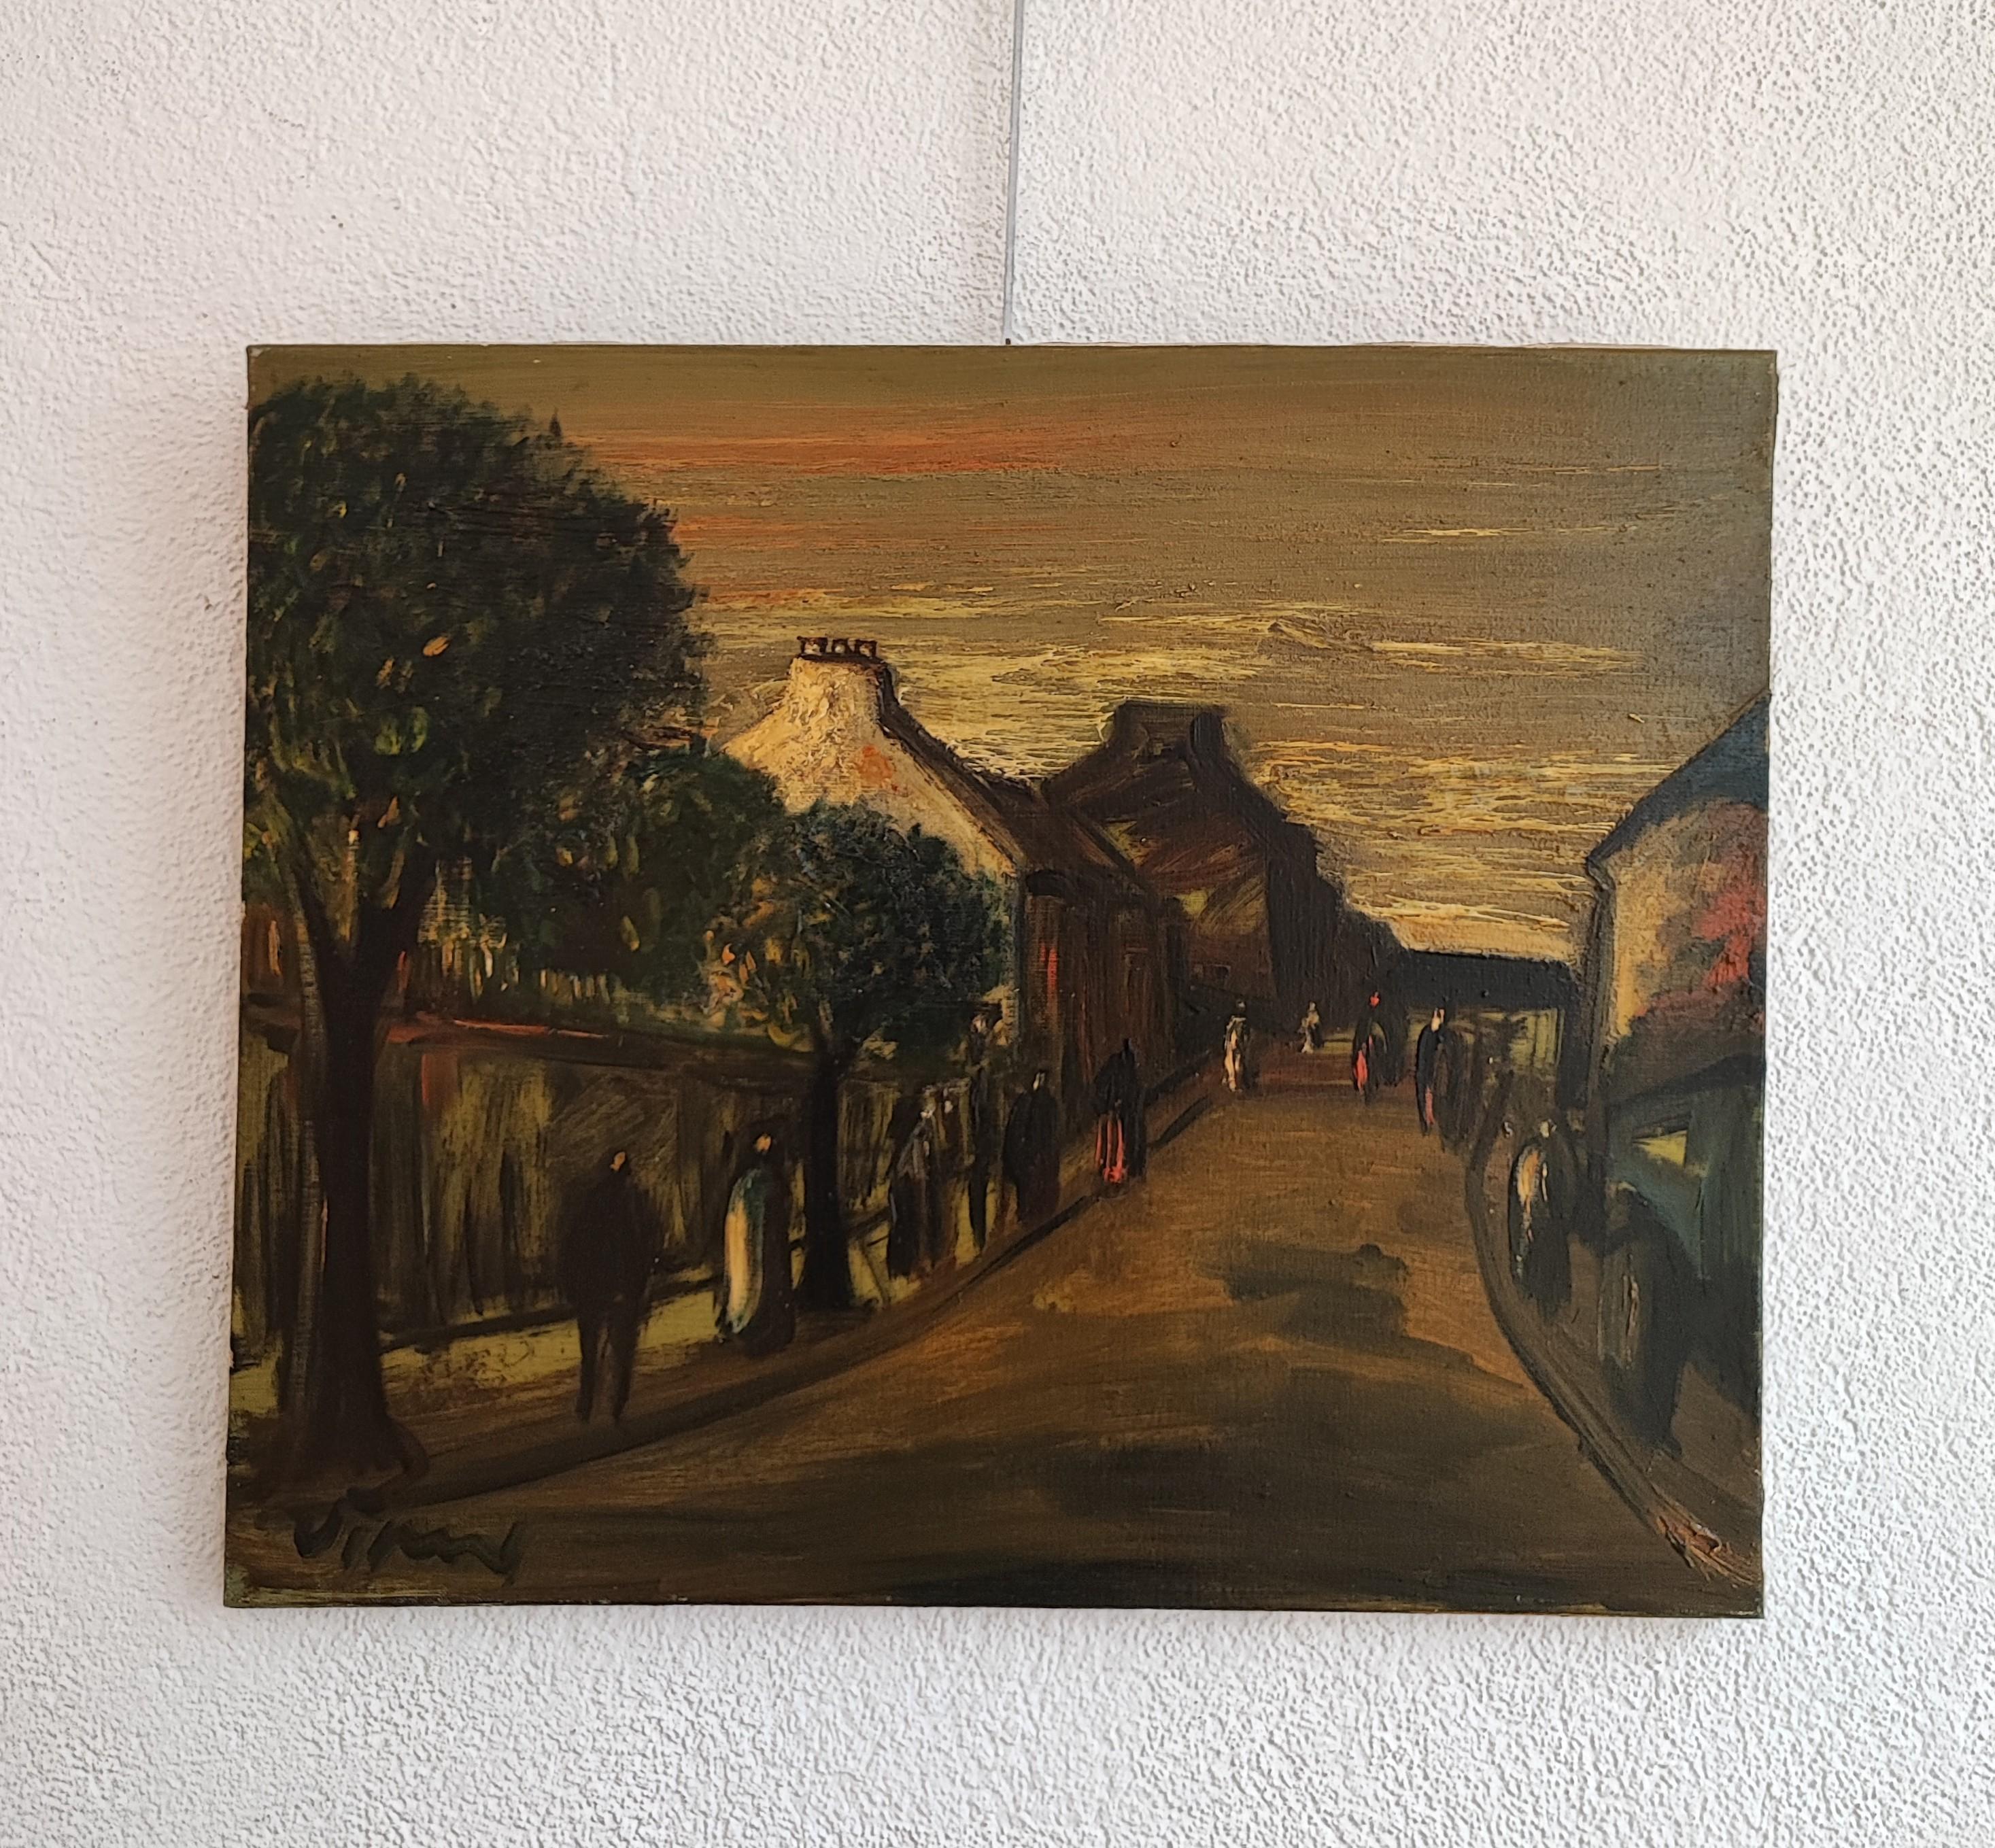 Busy street at sunset - Painting by Sylvain Vigny